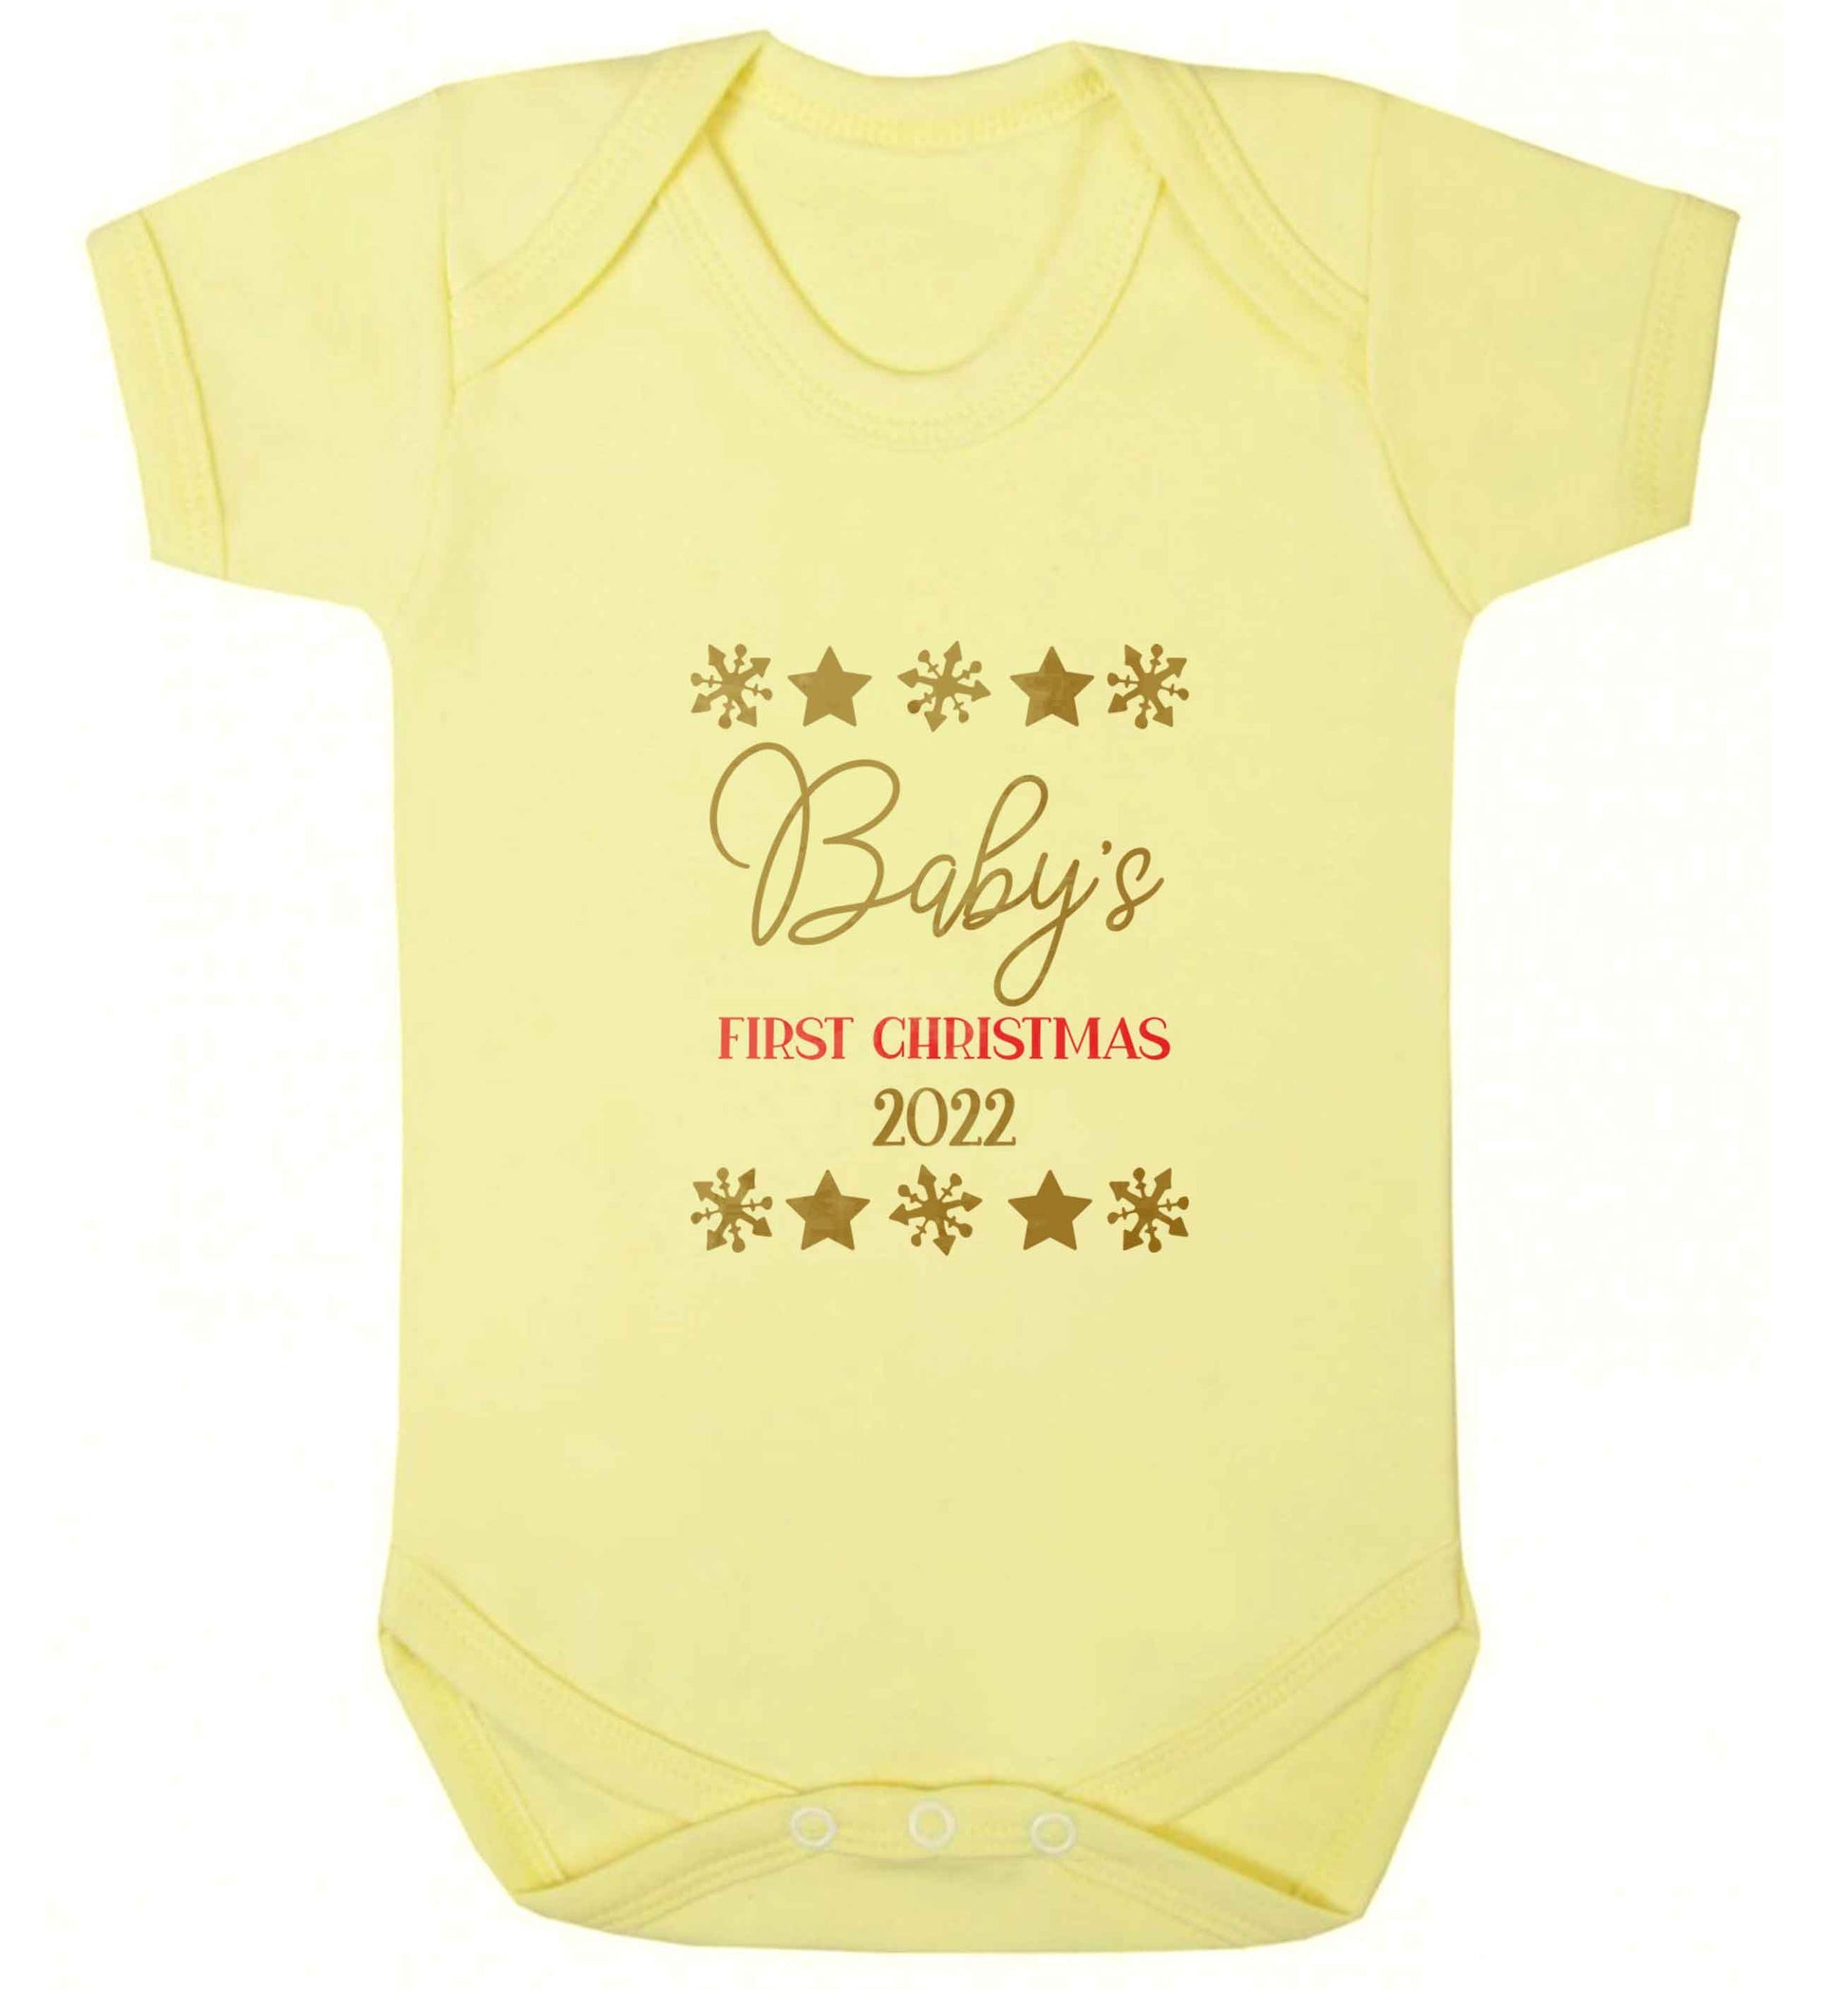 Baby's first Christmas baby vest pale yellow 18-24 months